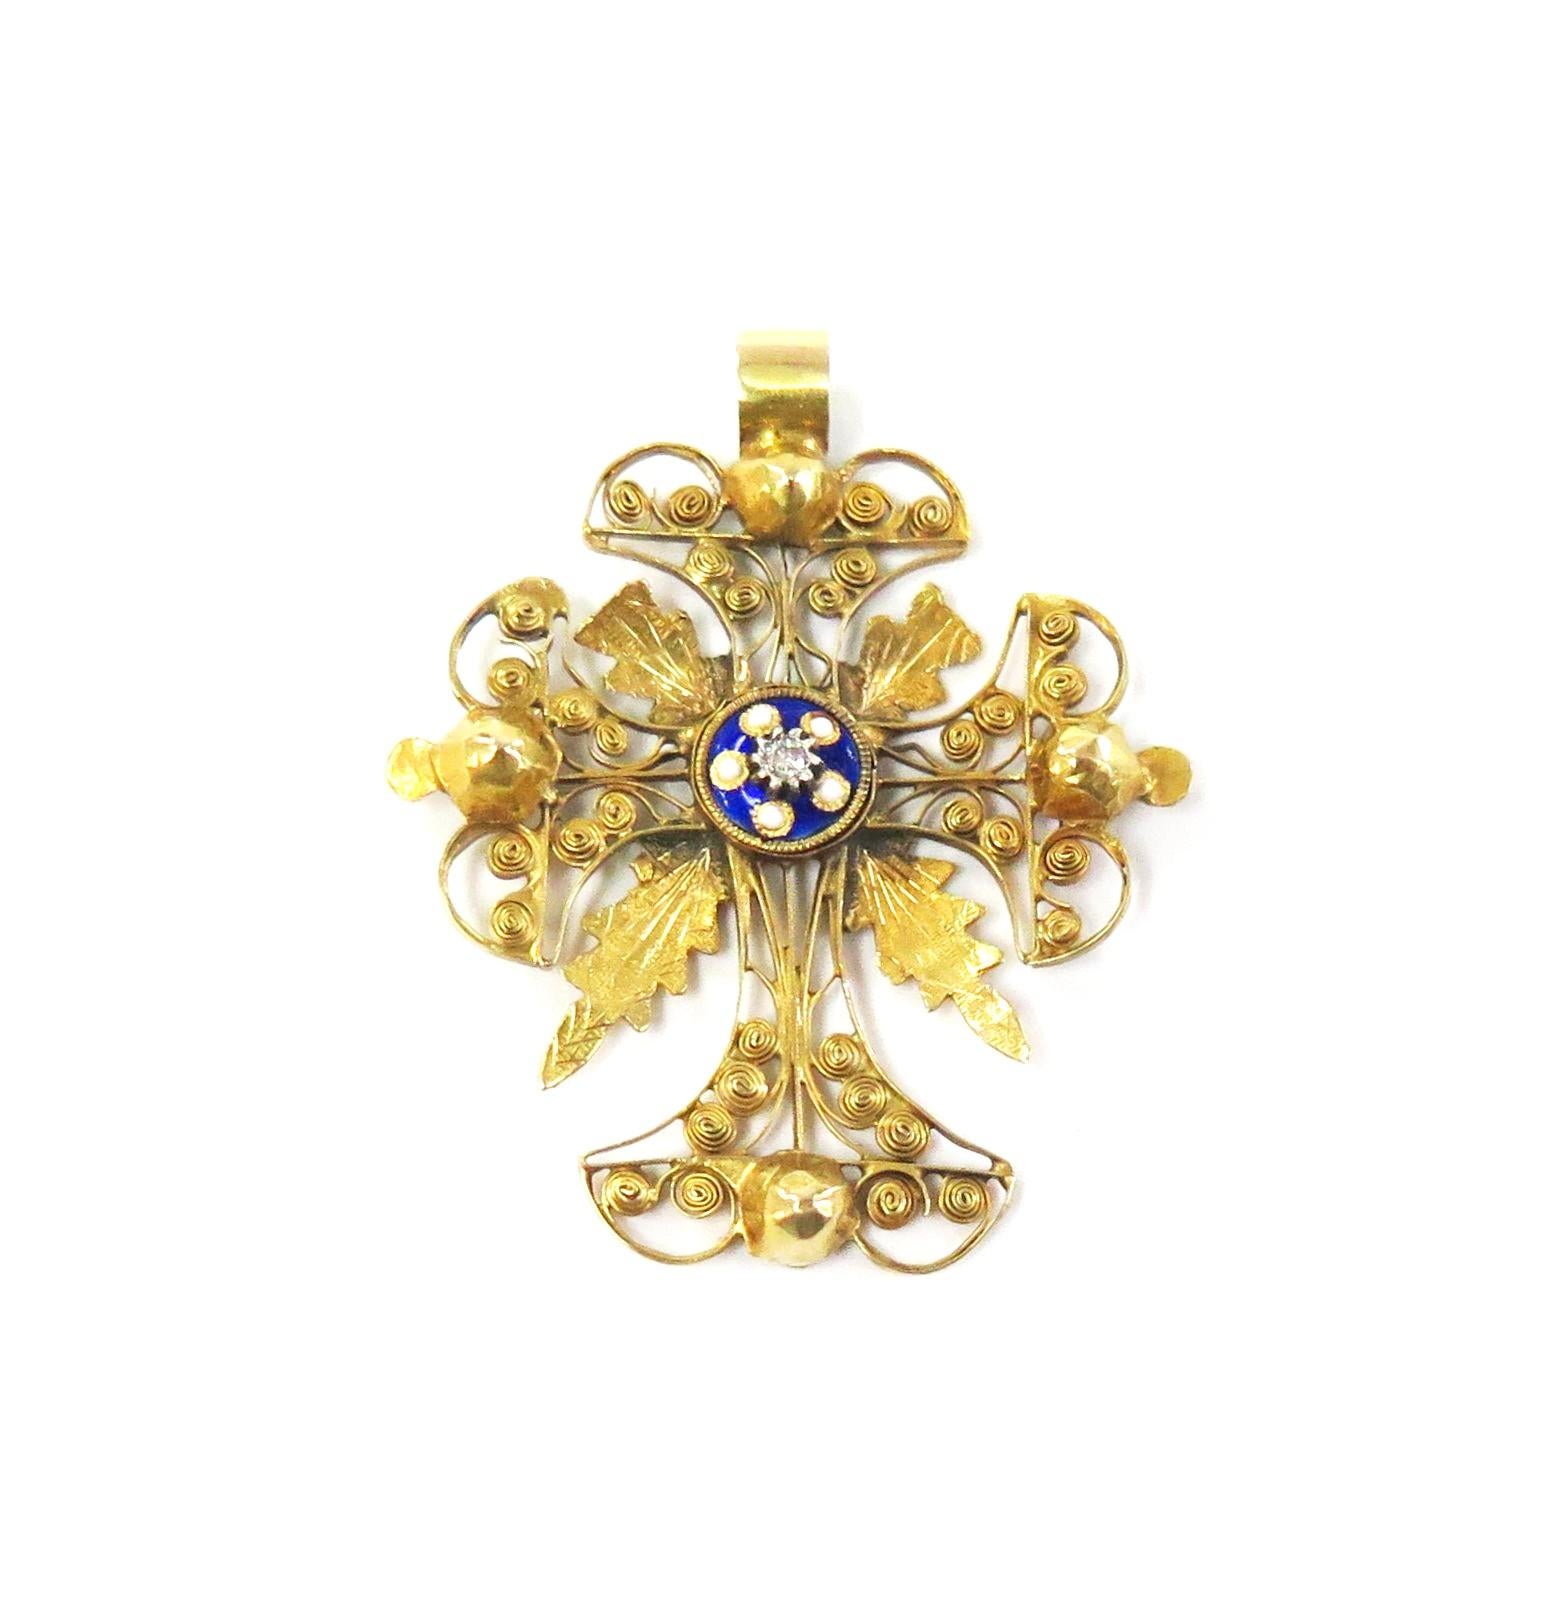 Beautiful detail on this 14 karat yellow gold handmade intricate filigree cross. The center is blue enamel with tiny white enamel dots. Inside the enamel is a silver setting with a tiny round diamond.

Length: 1 3/8